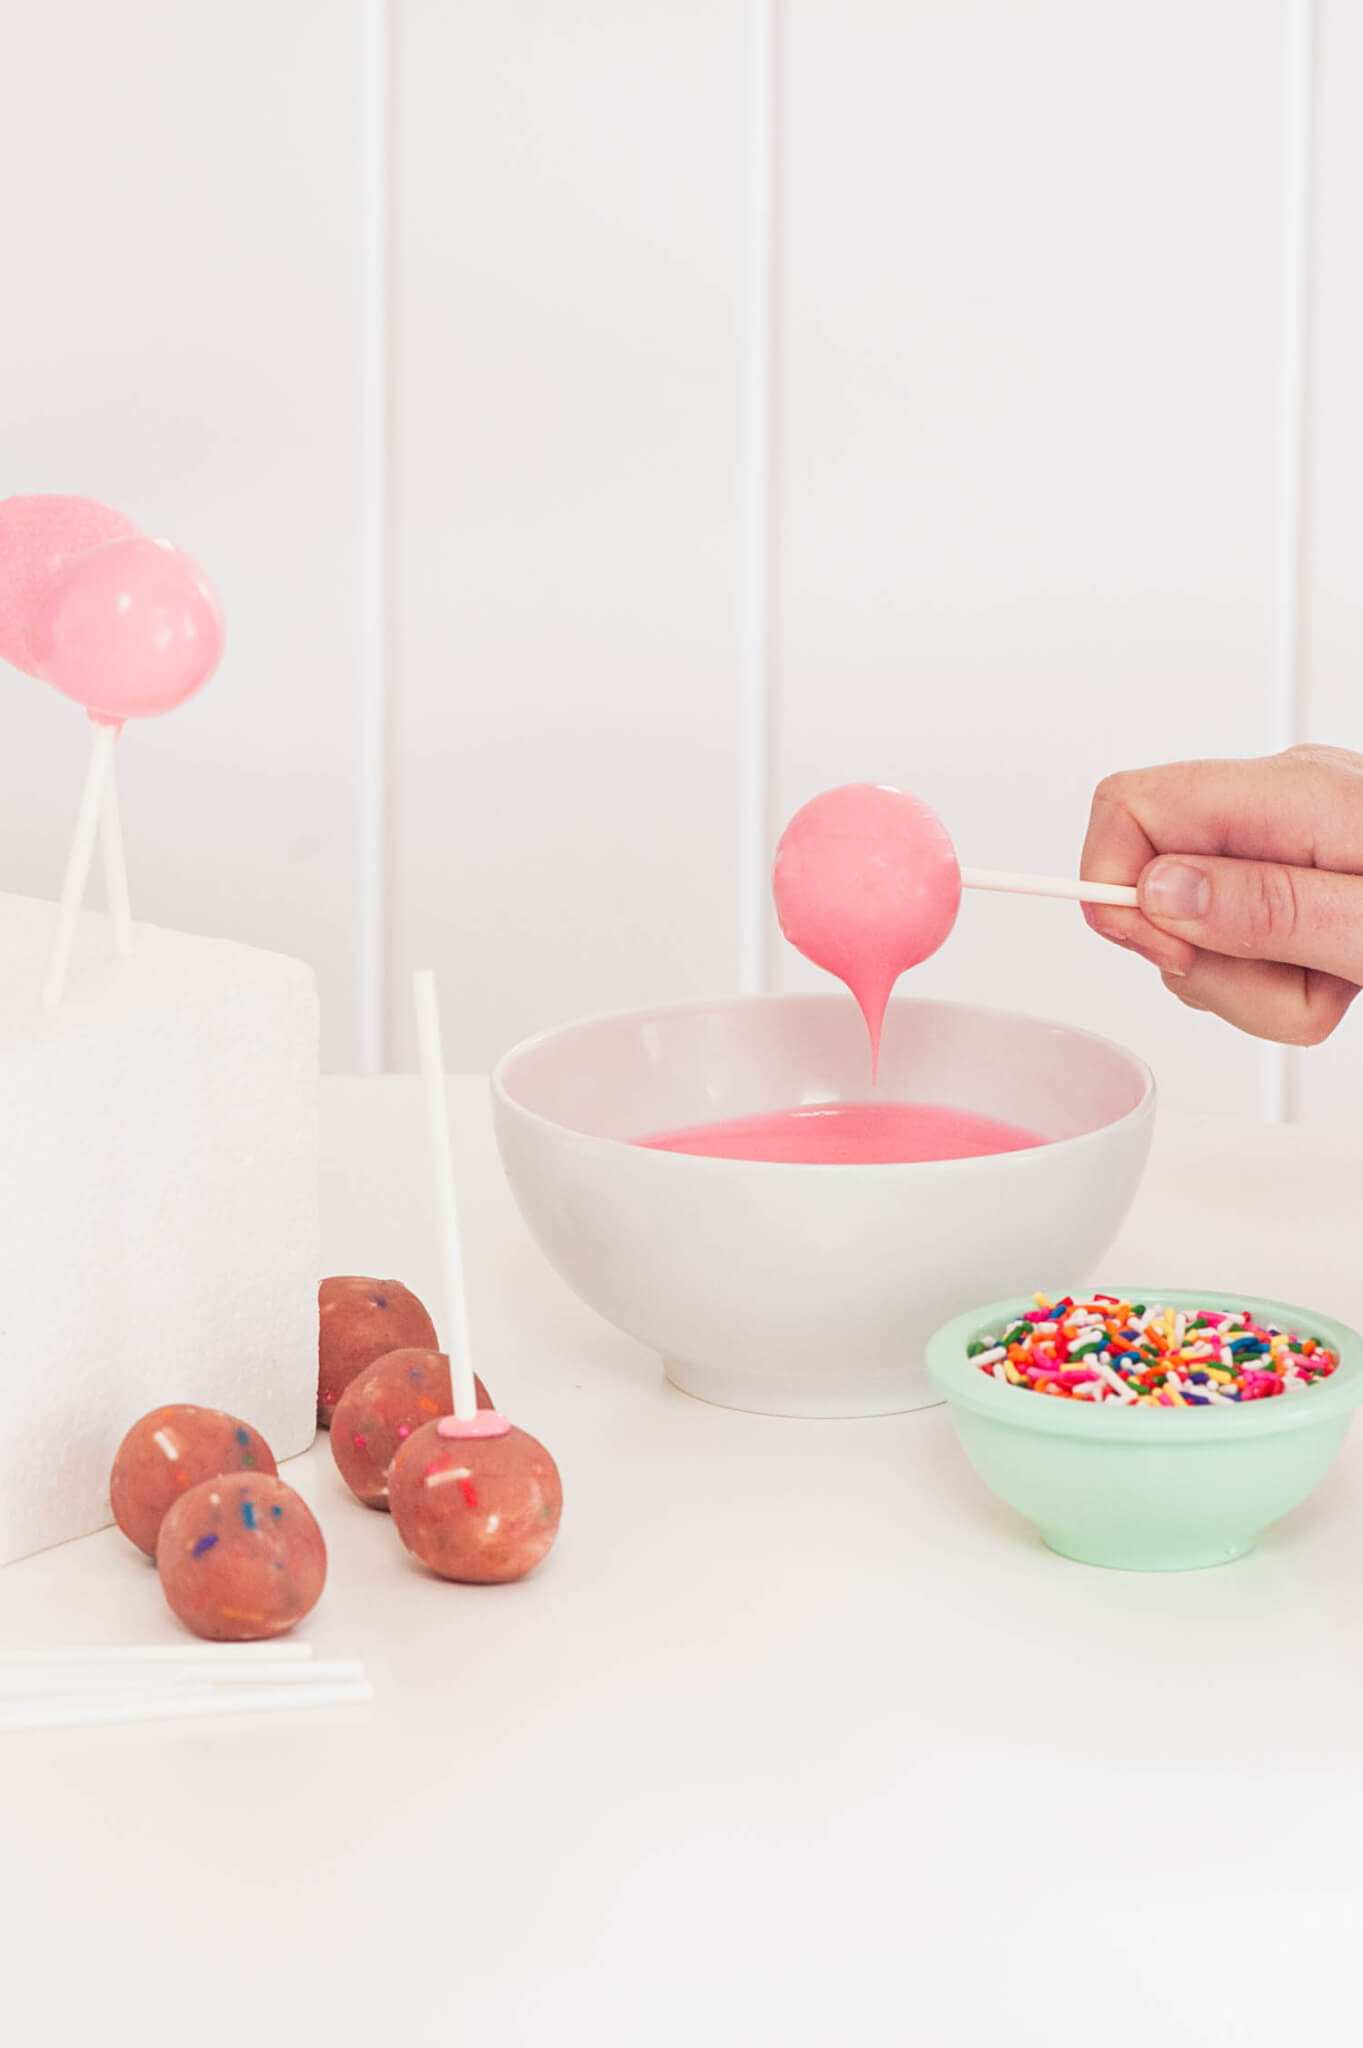 Strawberry Confetti Cake Pops being dipped in pink melting chocolate.